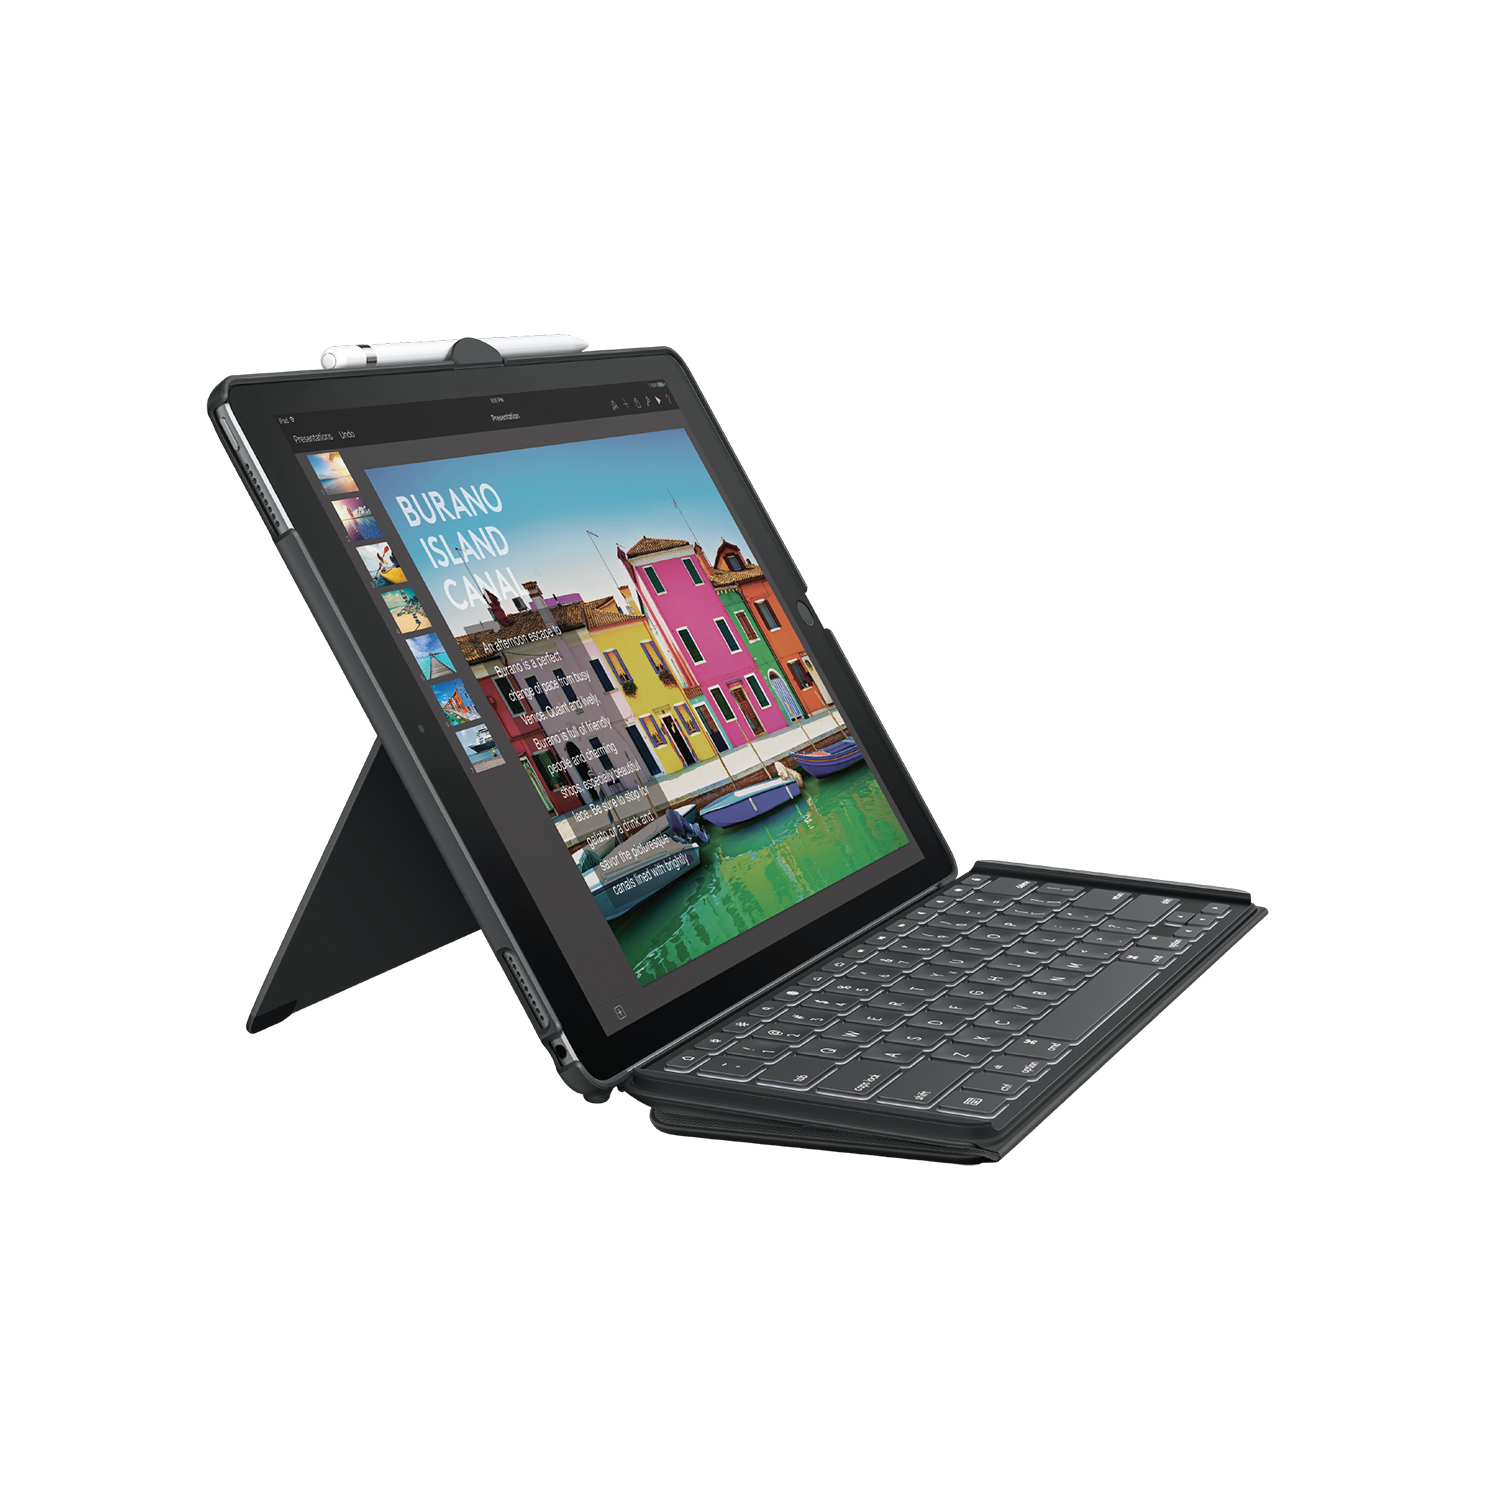 Logitech SLIM COMBO with detachable backlit keyboard and Smart Connector for iPad 12.9 inch (1st and 2nd generation) Black QWERTY